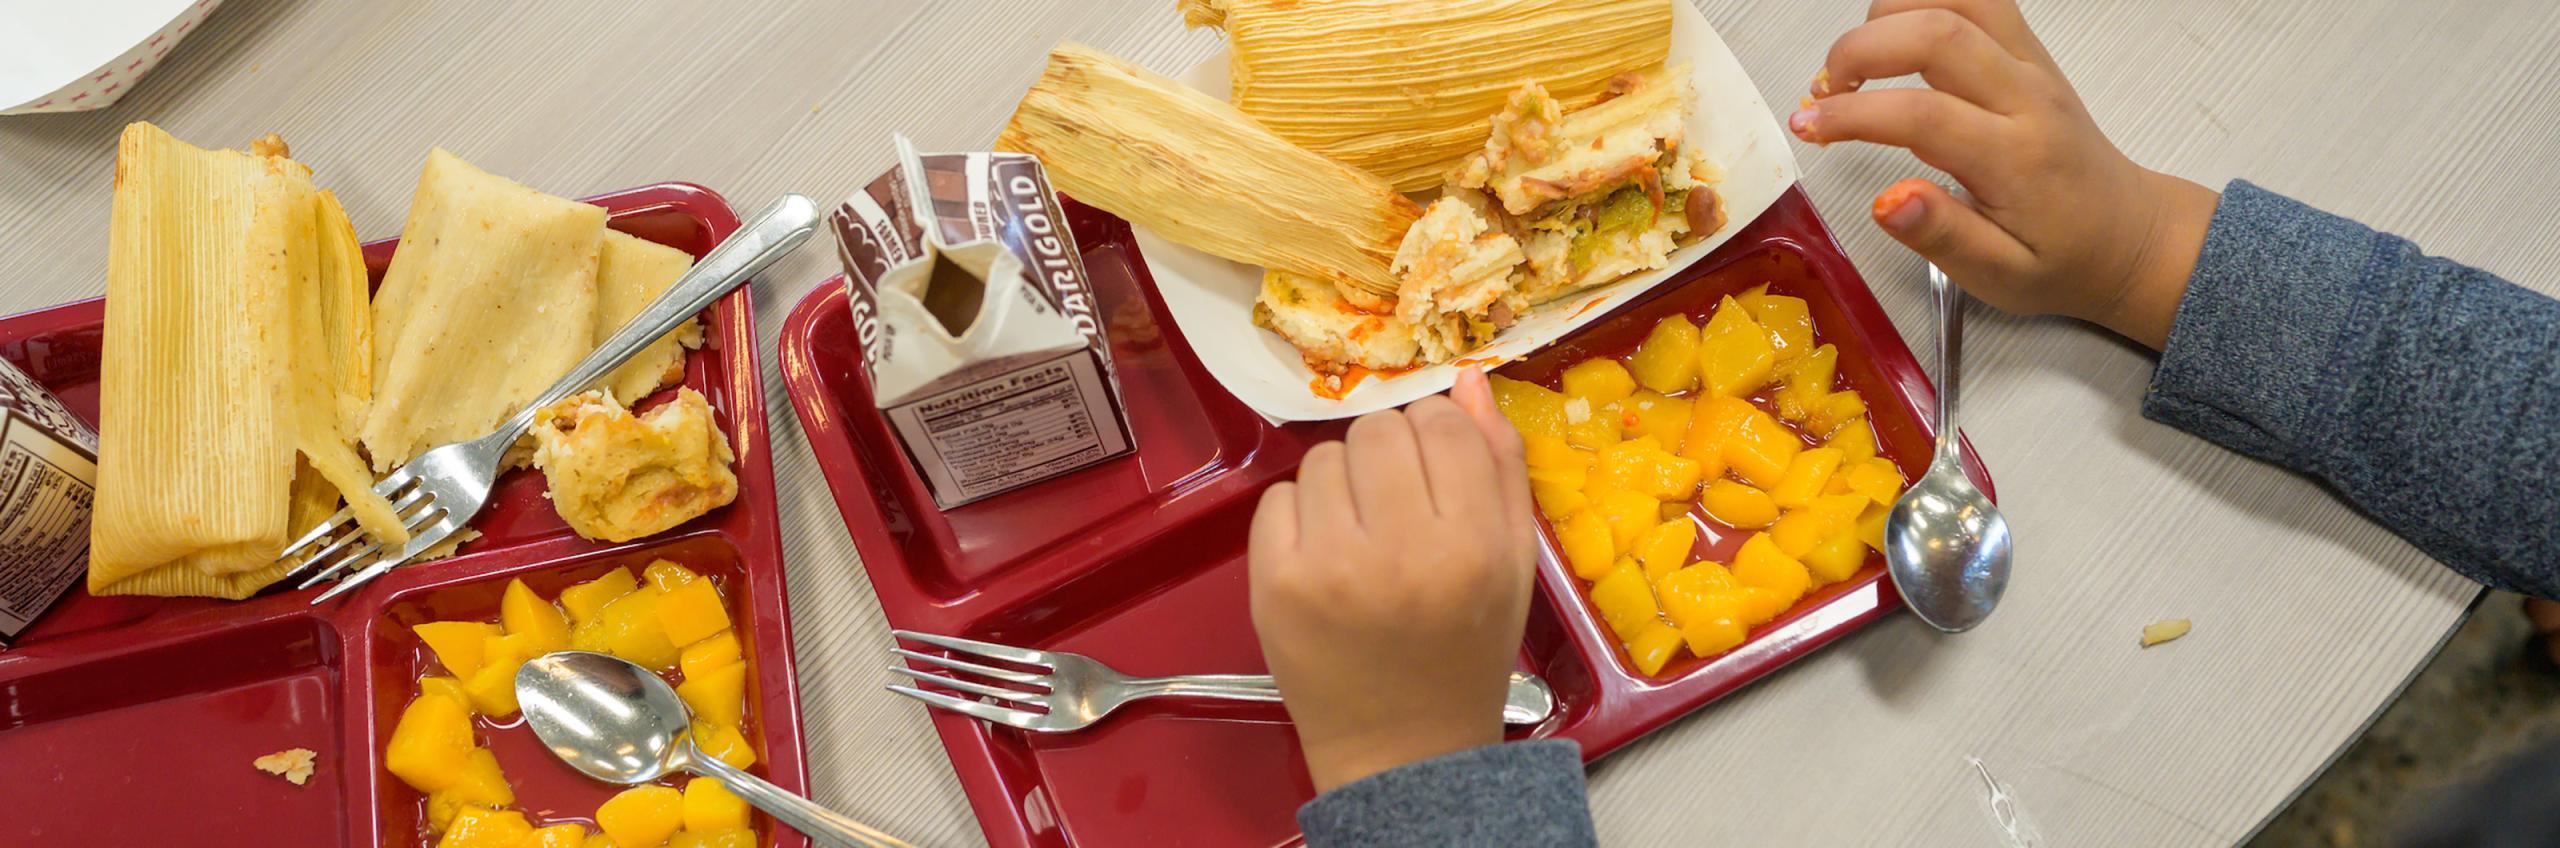 A photo taken from an overhead angle at two school lunch trays on a table. The trays hold cartons of milk, a paper tray of tamales, and canned peach chunks. A couple pairs of childrens hands are extended into the frame of the camera, resting near the trays.